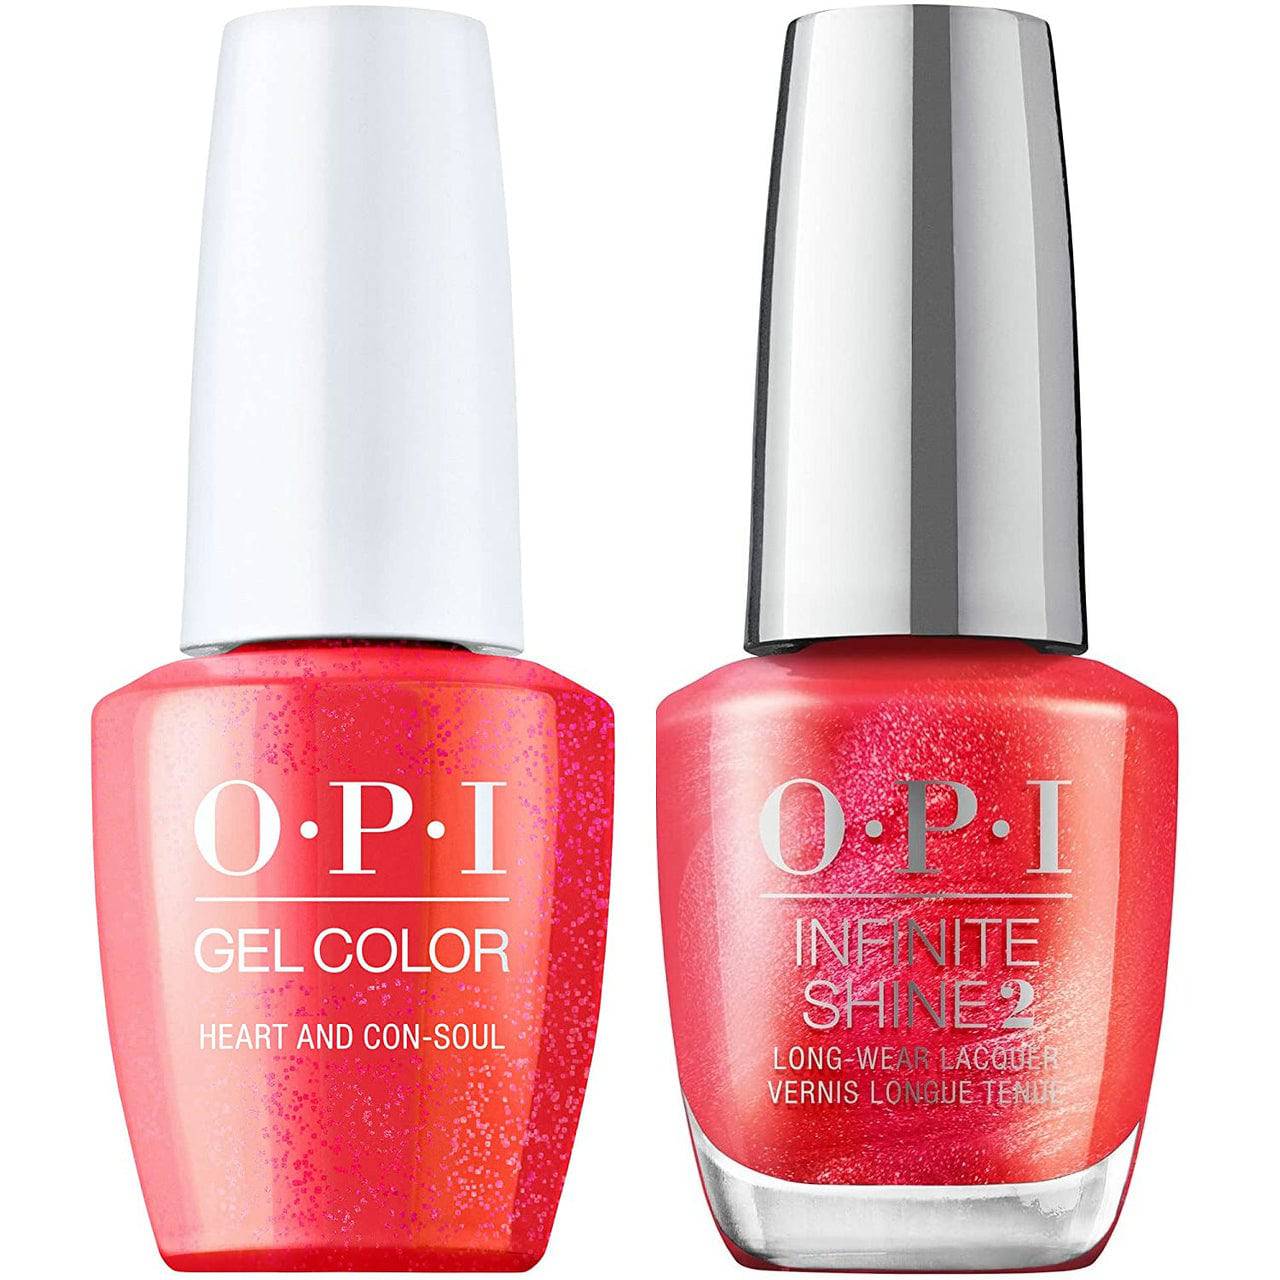 OPI GelColor + Infinite Shine Heart and Con-soul #D55 - Universal Nail Supplies